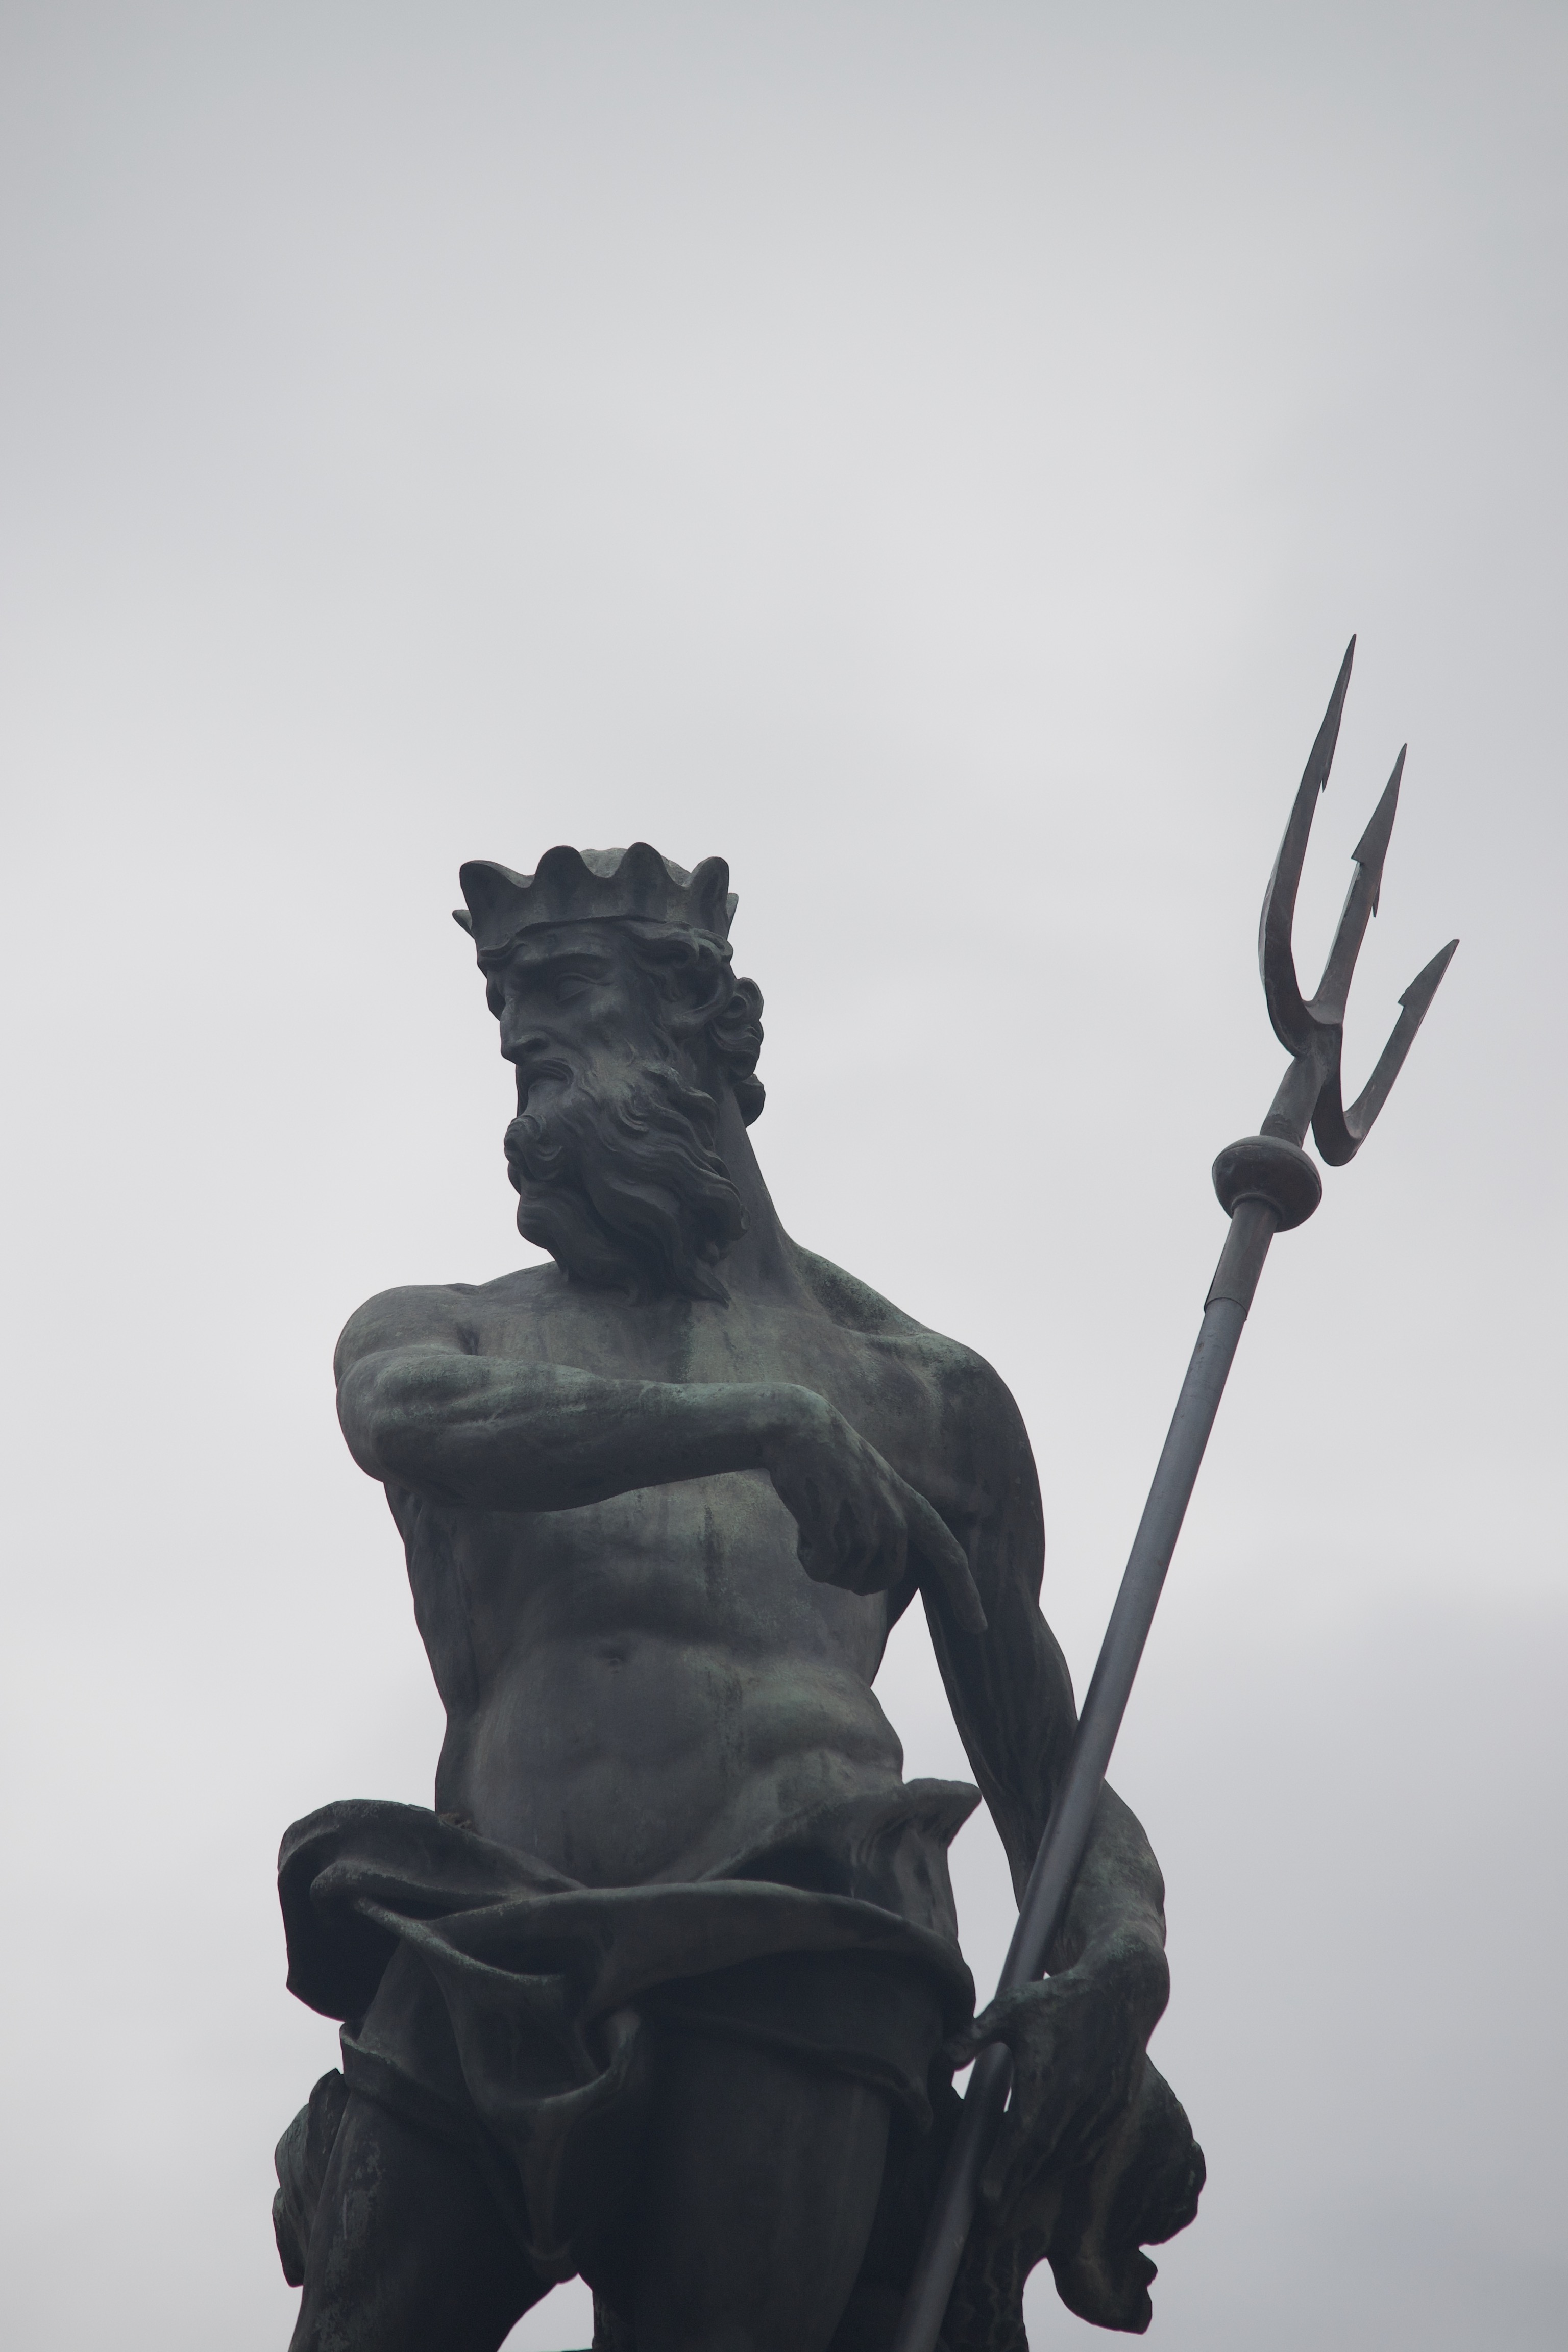 A shirtless, crowned, metal figure points with his right hand to the trident held by his left.